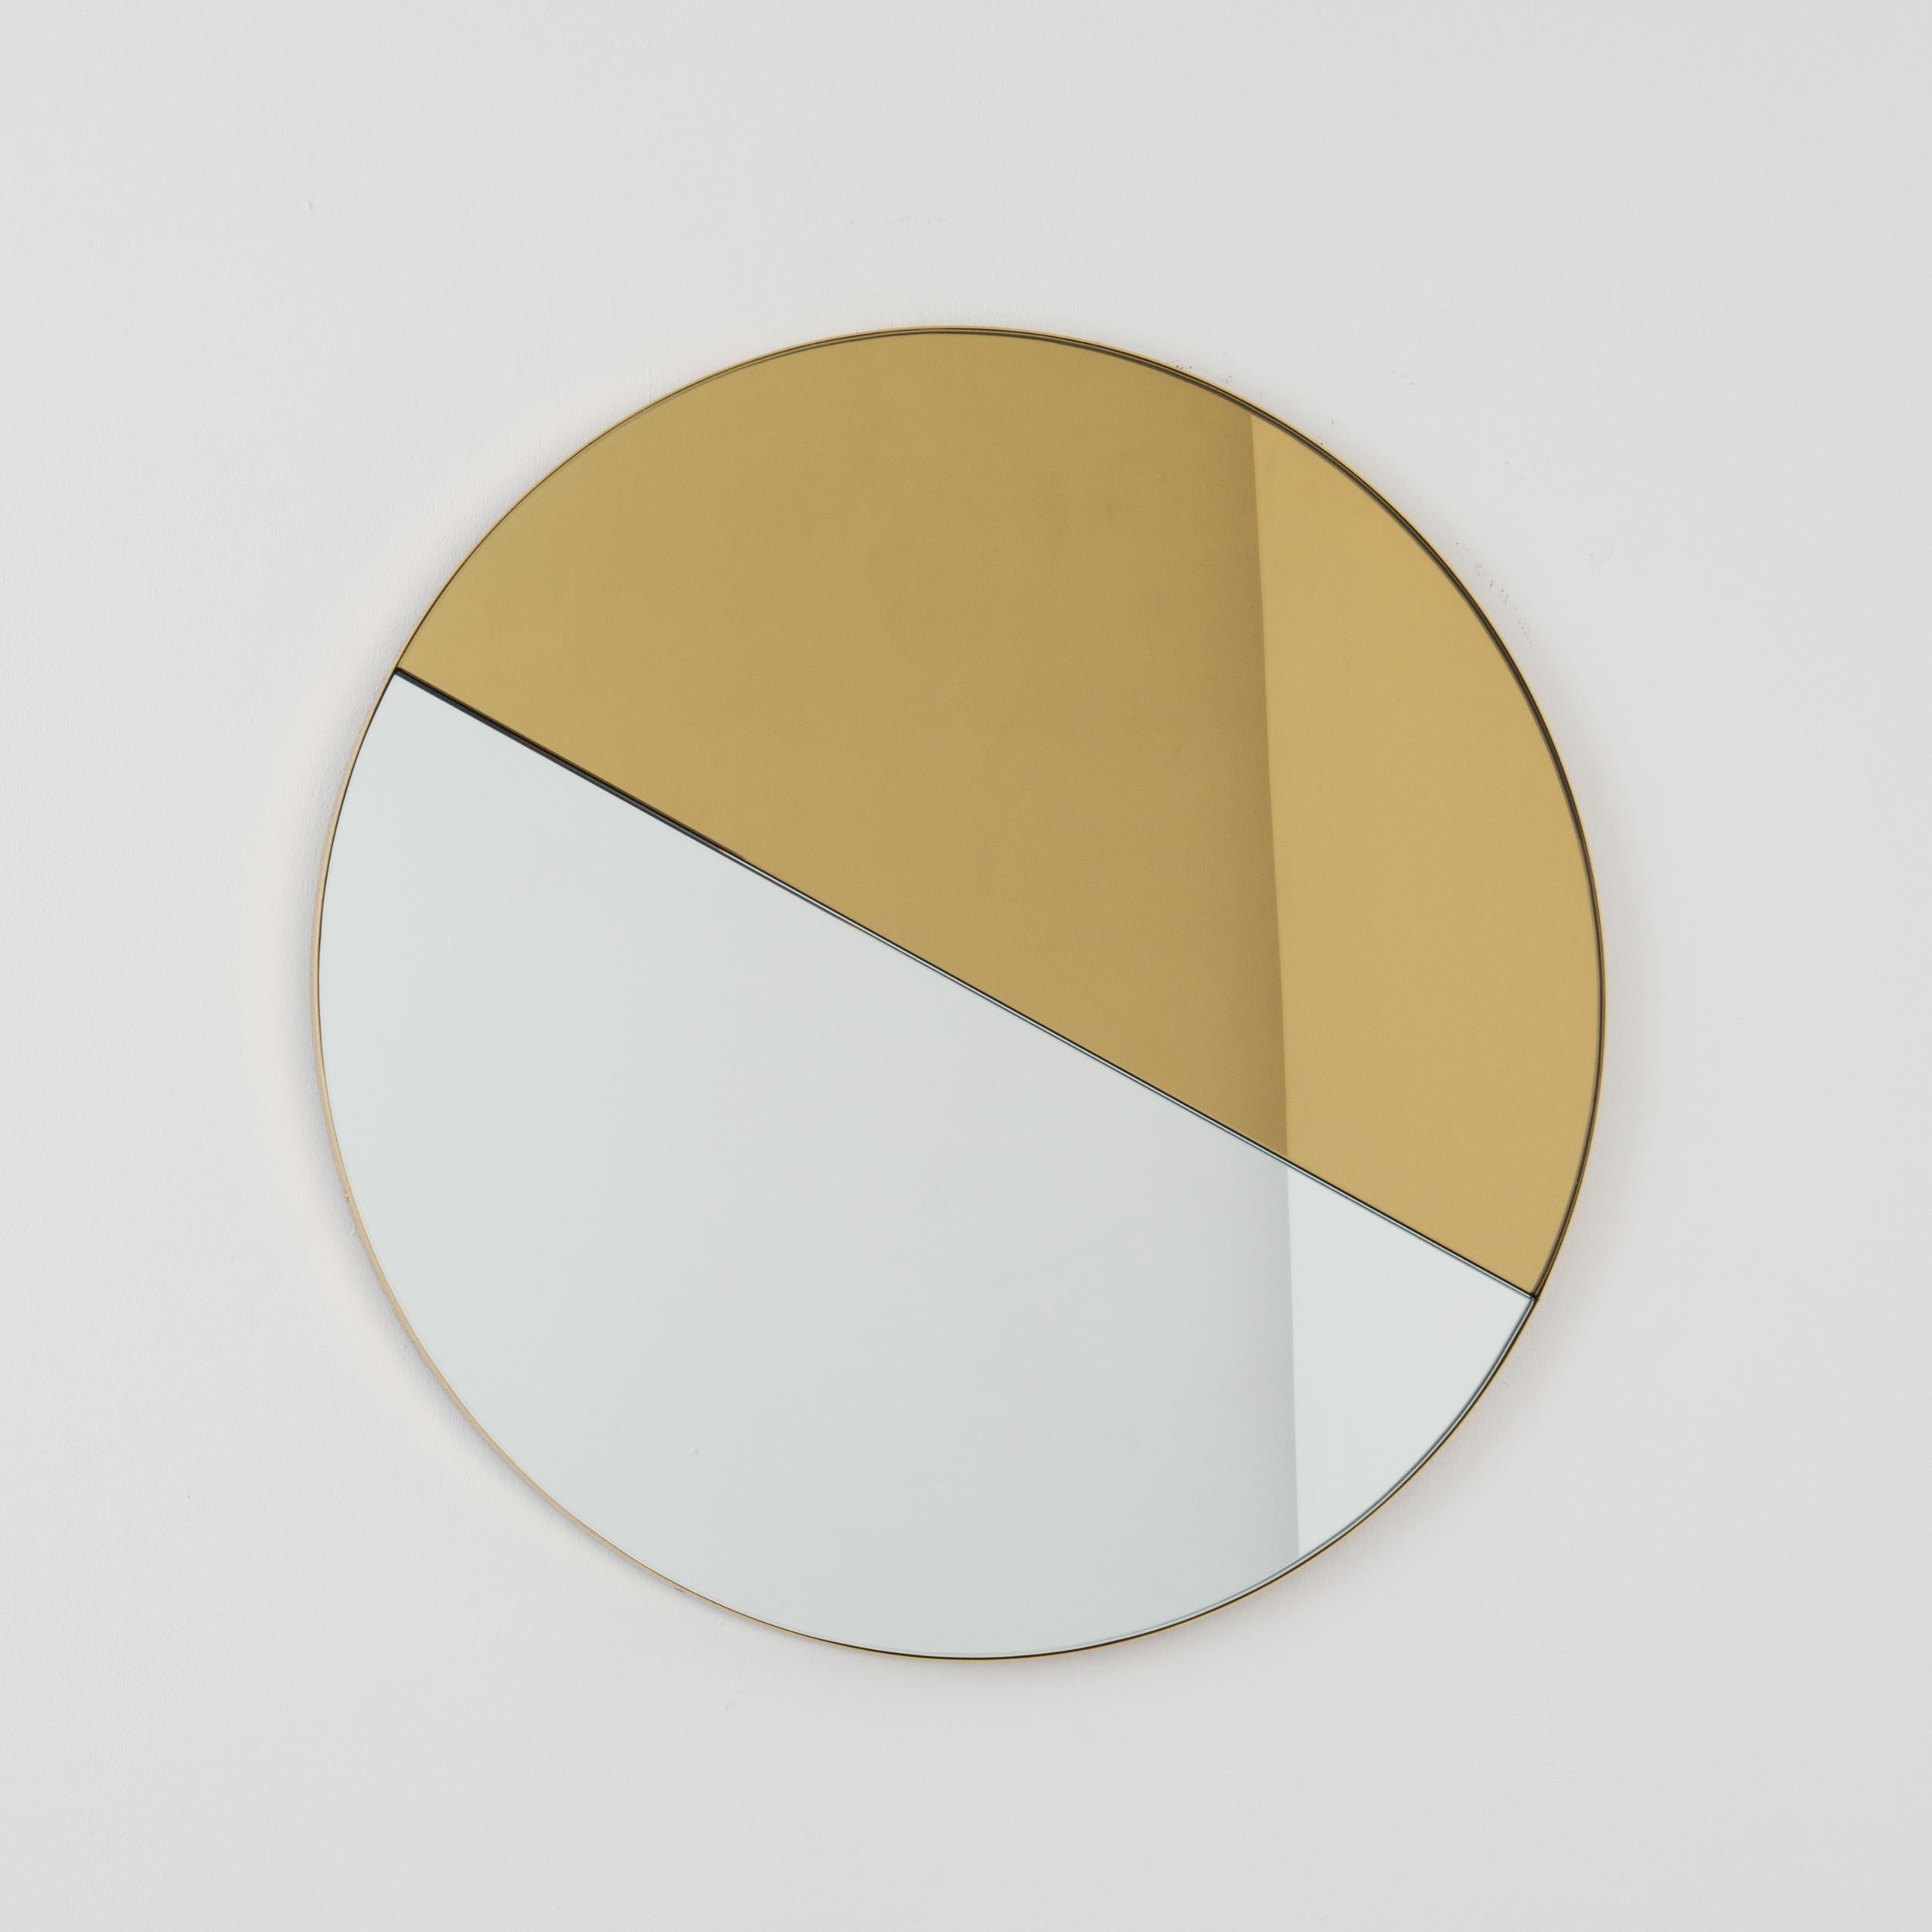 Contemporary mixed tinted gold and silver Orbis Dualis™ mirror with an elegant solid brushed brass frame. Supplied fully fitted with a specialist hanging system that allows the mirror to be hung in four different positions. Designed and handcrafted